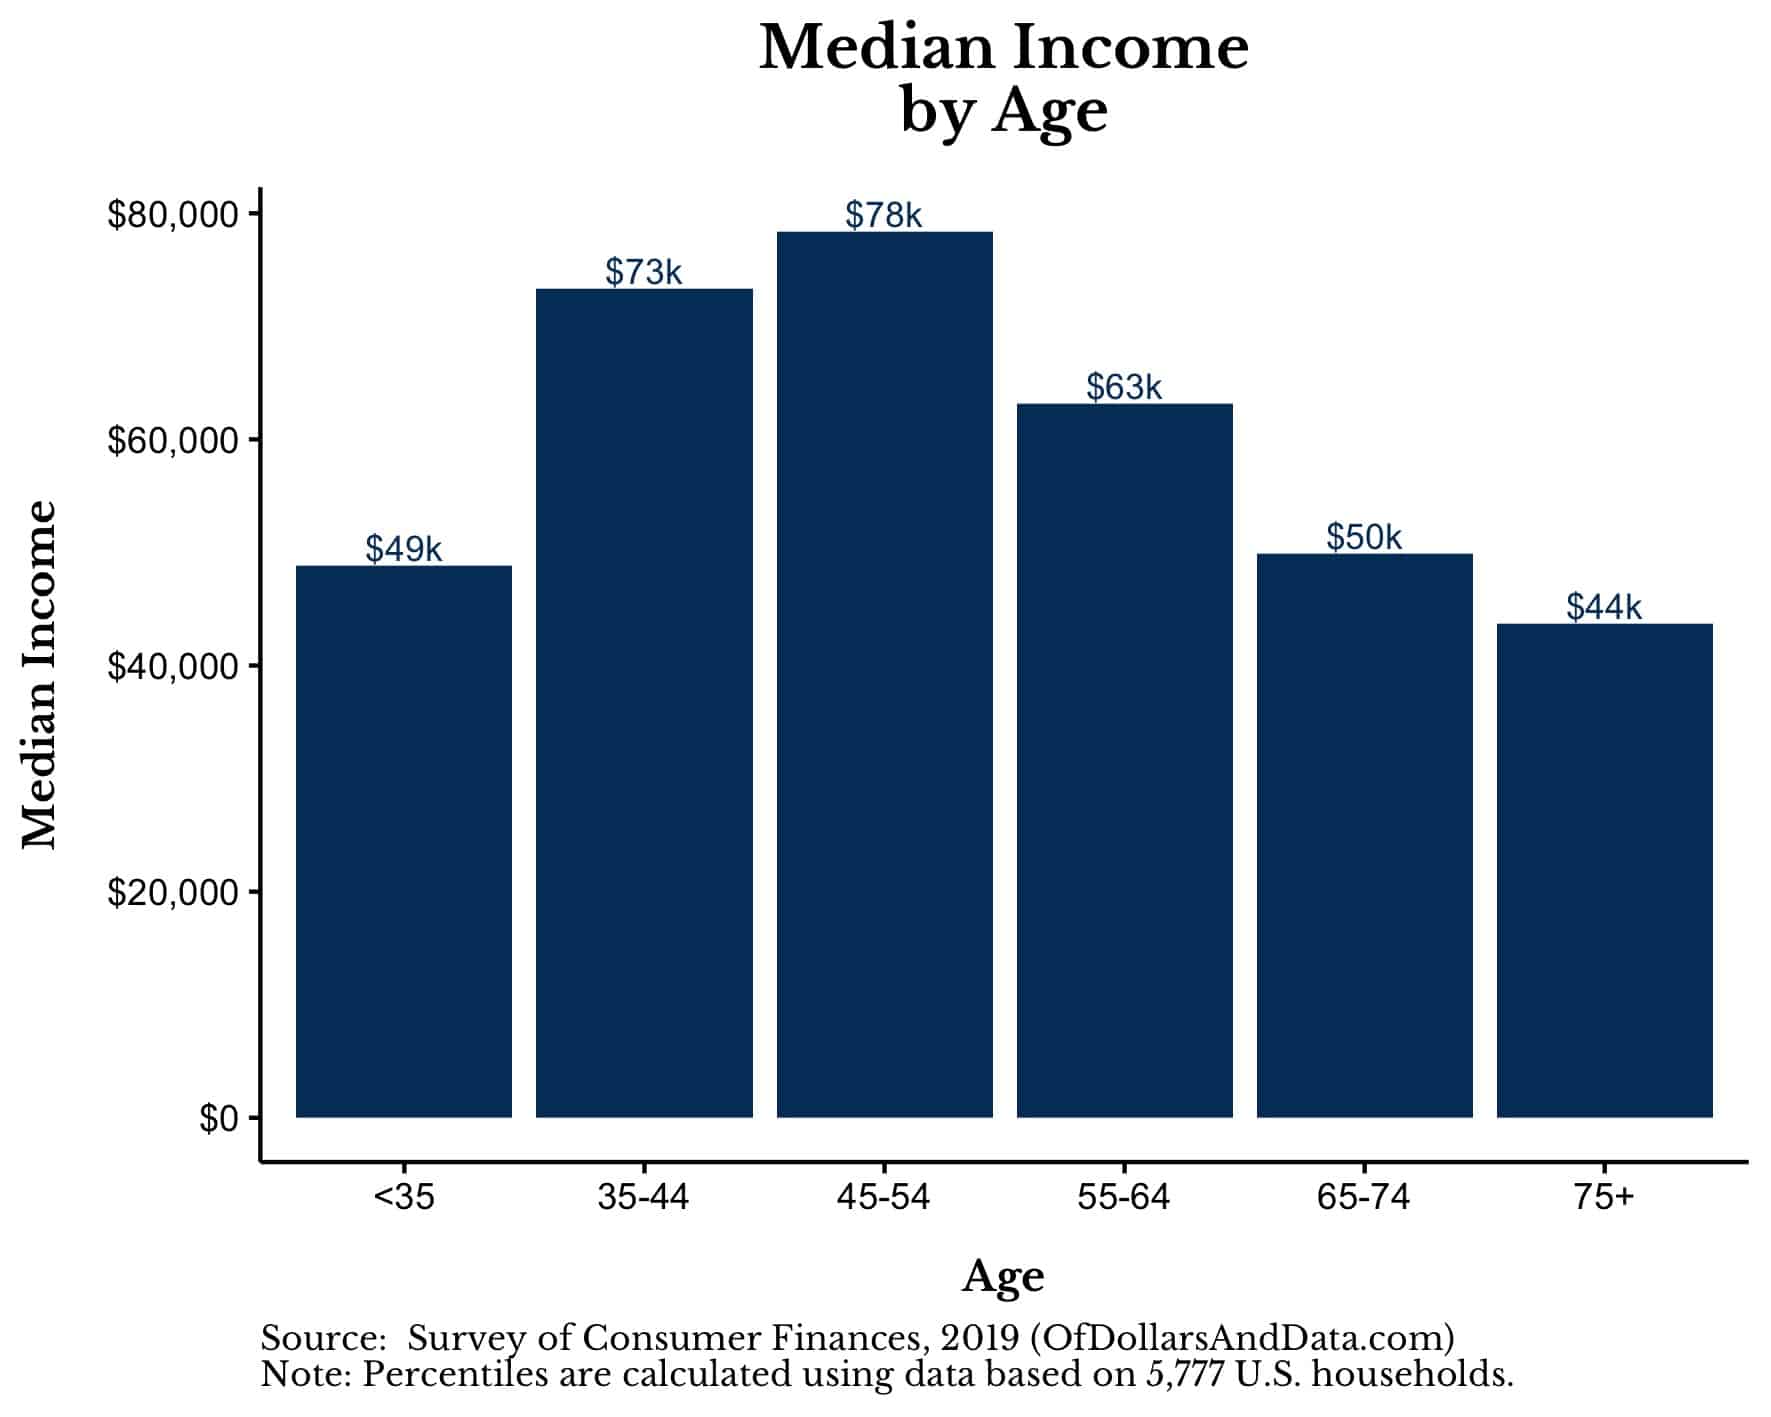 Median houeshold income by age in the U.S. from the 2019 Survey of Consumer Finances.